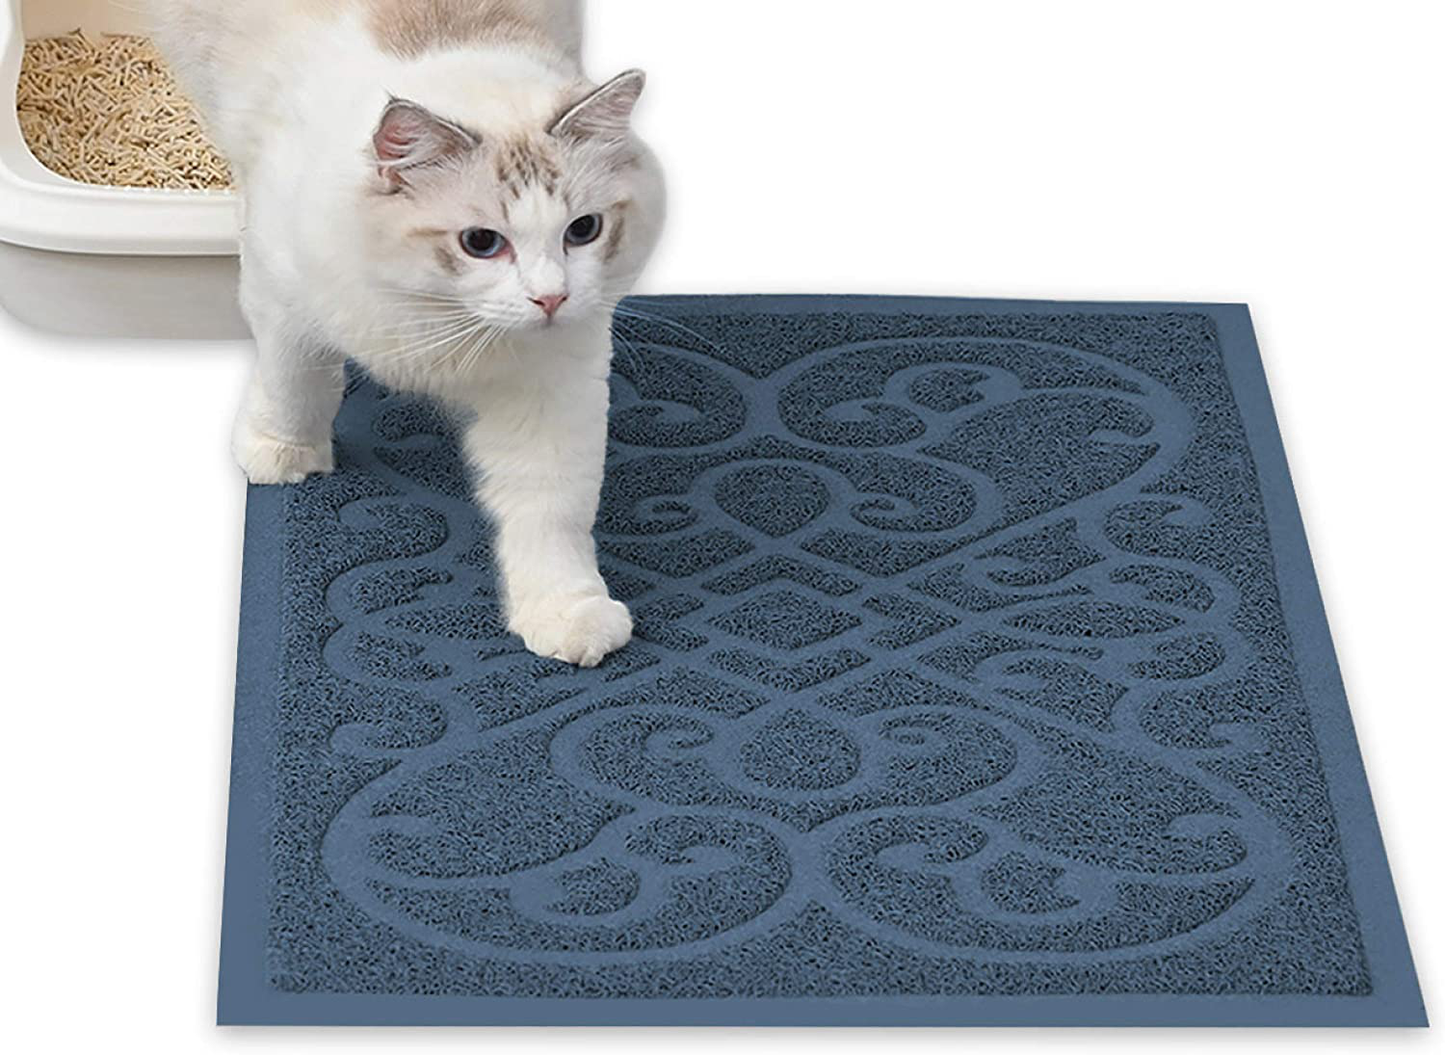 Petlike Cat Litter Mat Kitty Litter Trapping Mat, Durable Cat Litter Box Mat Waterproof, Phthalate Free, 3 Size Mats with Non-Slip Bottom, Soft on Kitty Paws, Easy to Clean Animals & Pet Supplies > Pet Supplies > Cat Supplies > Cat Litter Box Mats PetLike Sliver Blue 35x24 